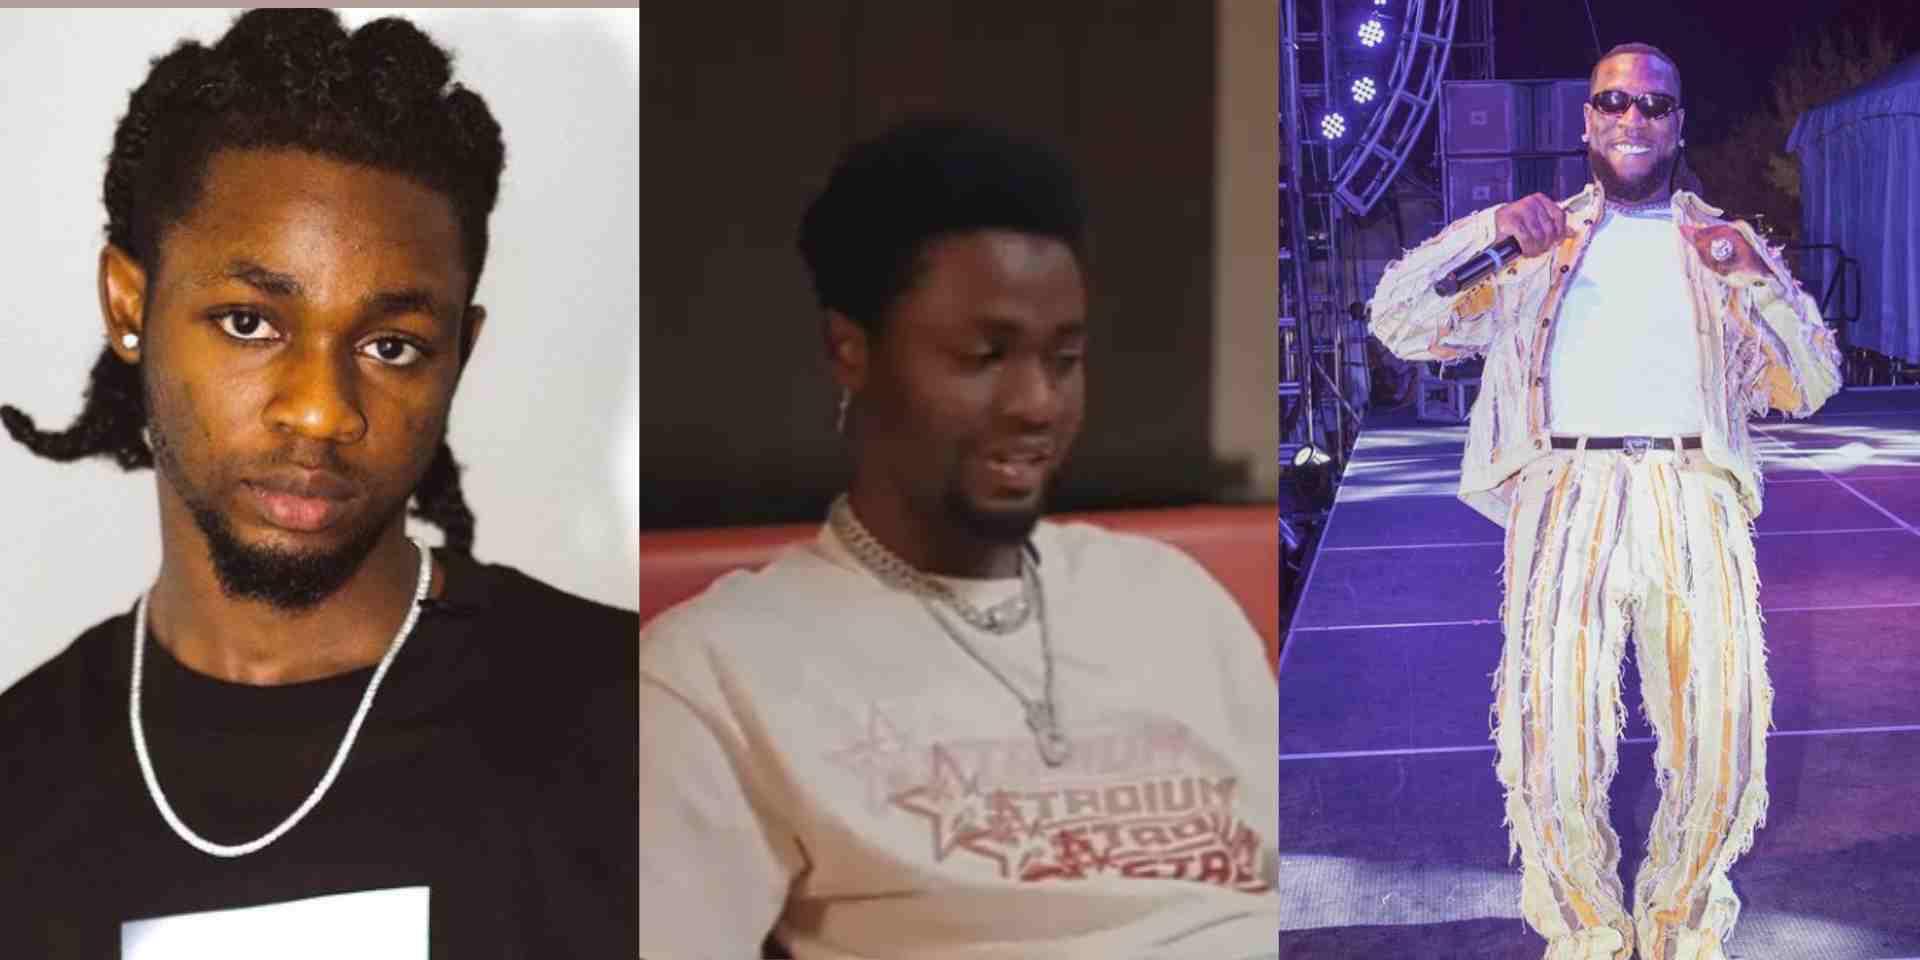 "I don't see anyone in the music industry apart from Burna Boy" - Omah Lay triggers backlashes (Video)